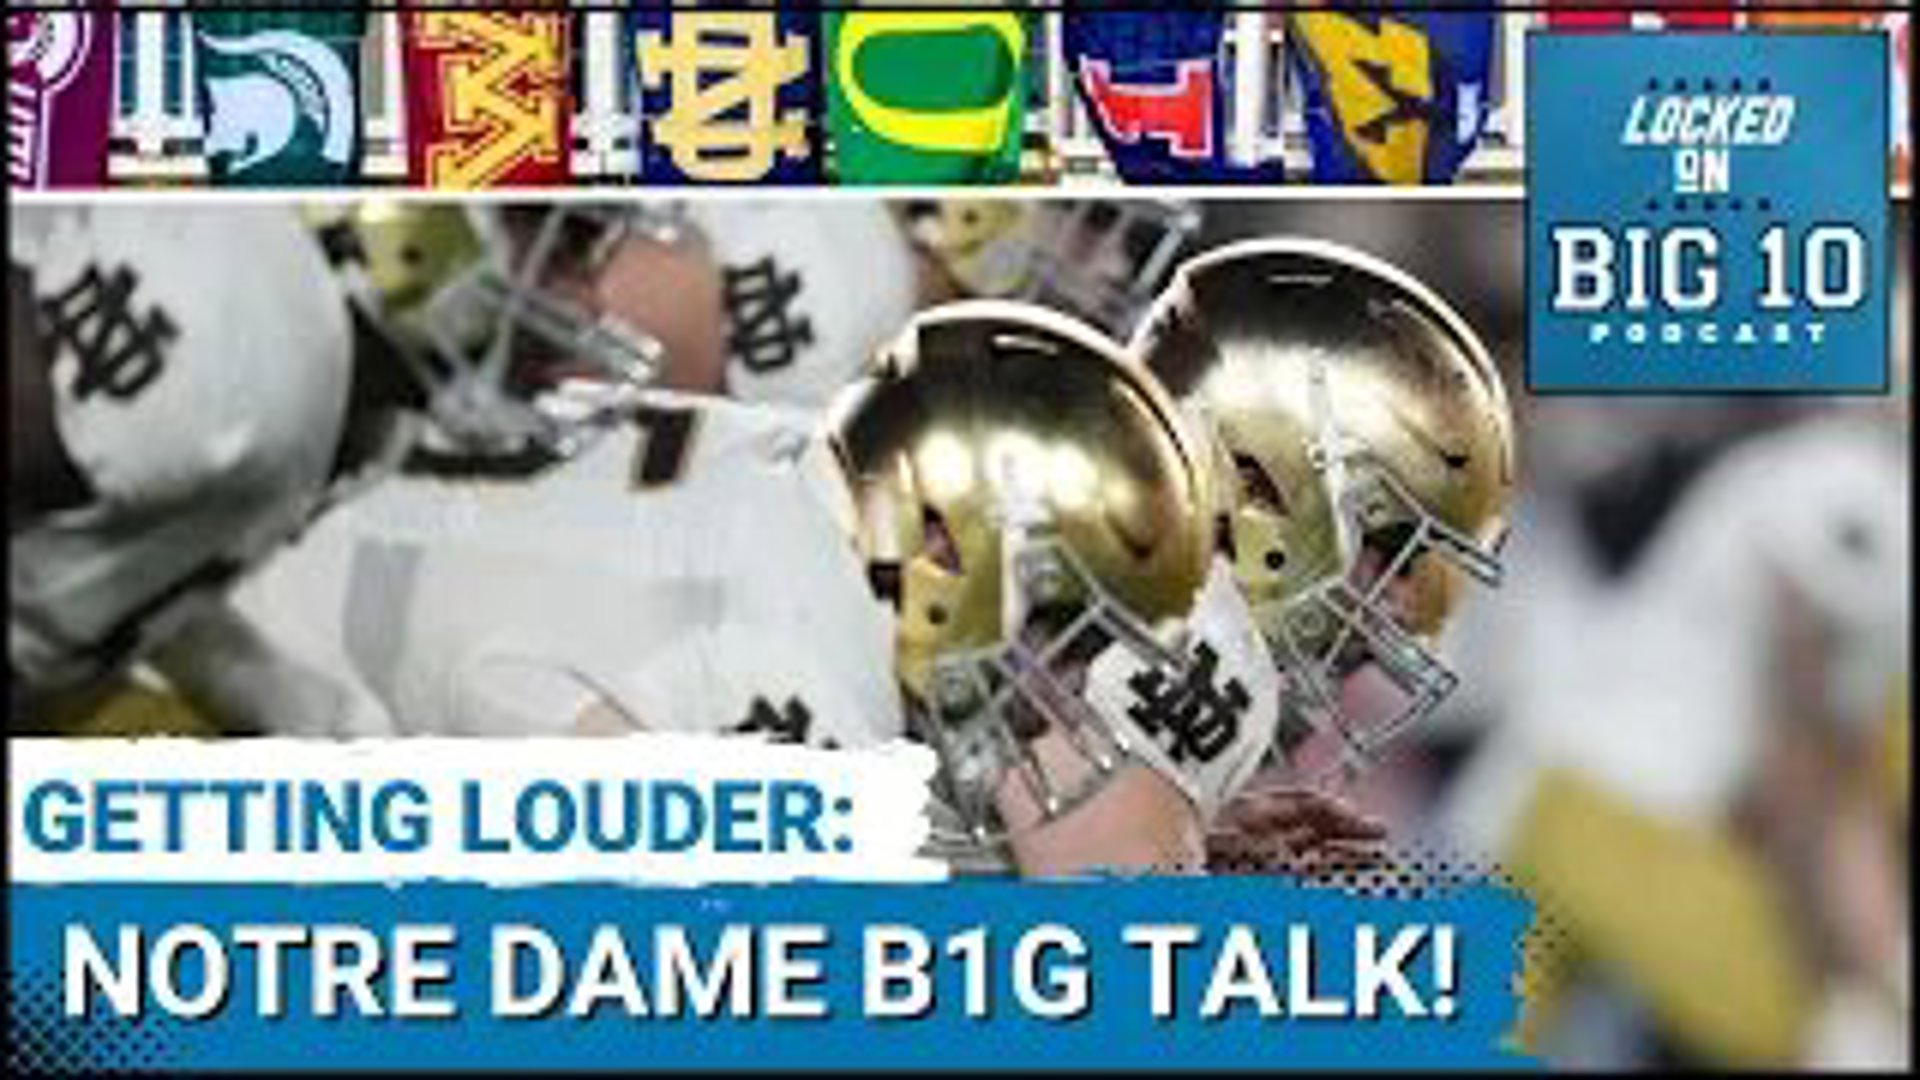 The time has come for Notre Dame to join the Big Ten and step in line with the rest of college football.